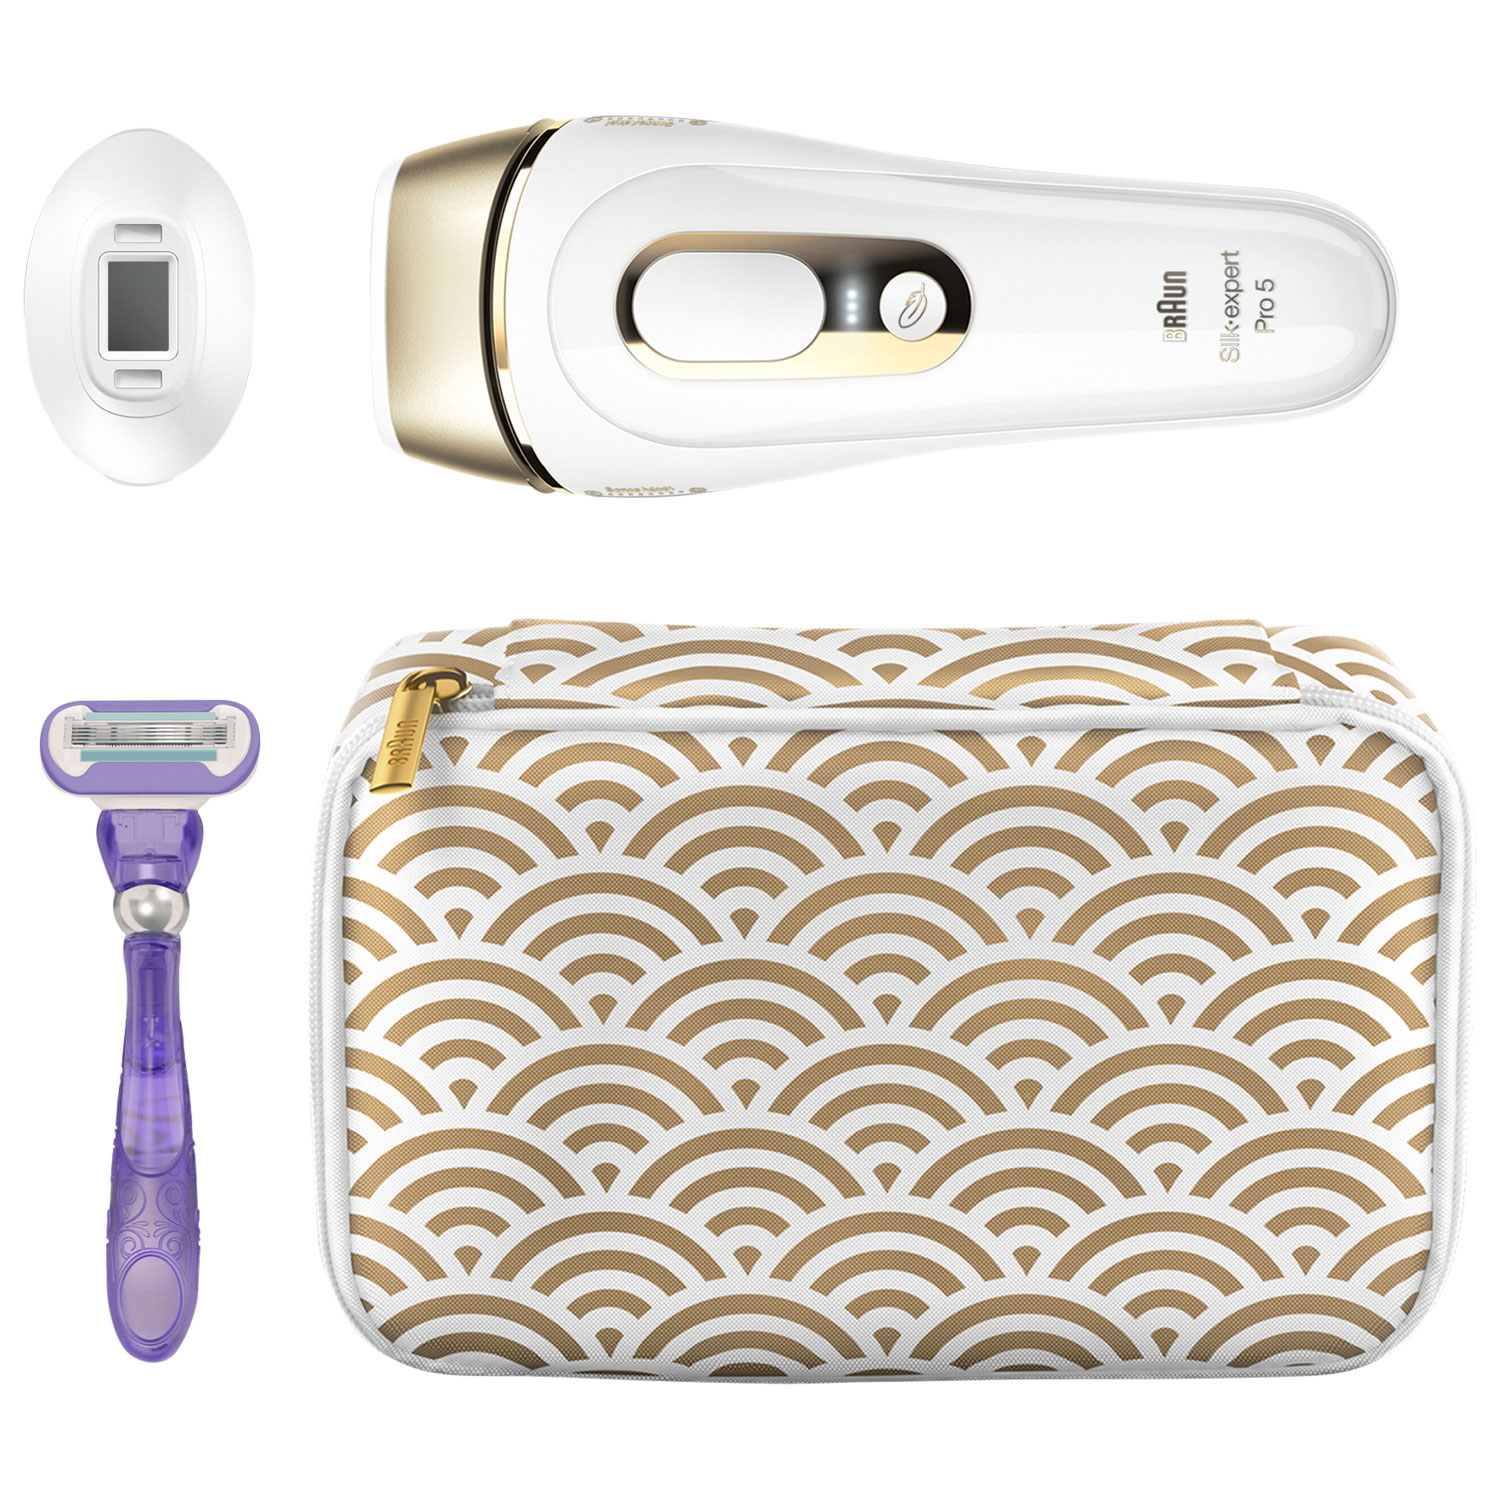 BRAUN SILK EXPERT PRO 5 - IPL AT HOME HAIR REMOVAL SYSTEM 